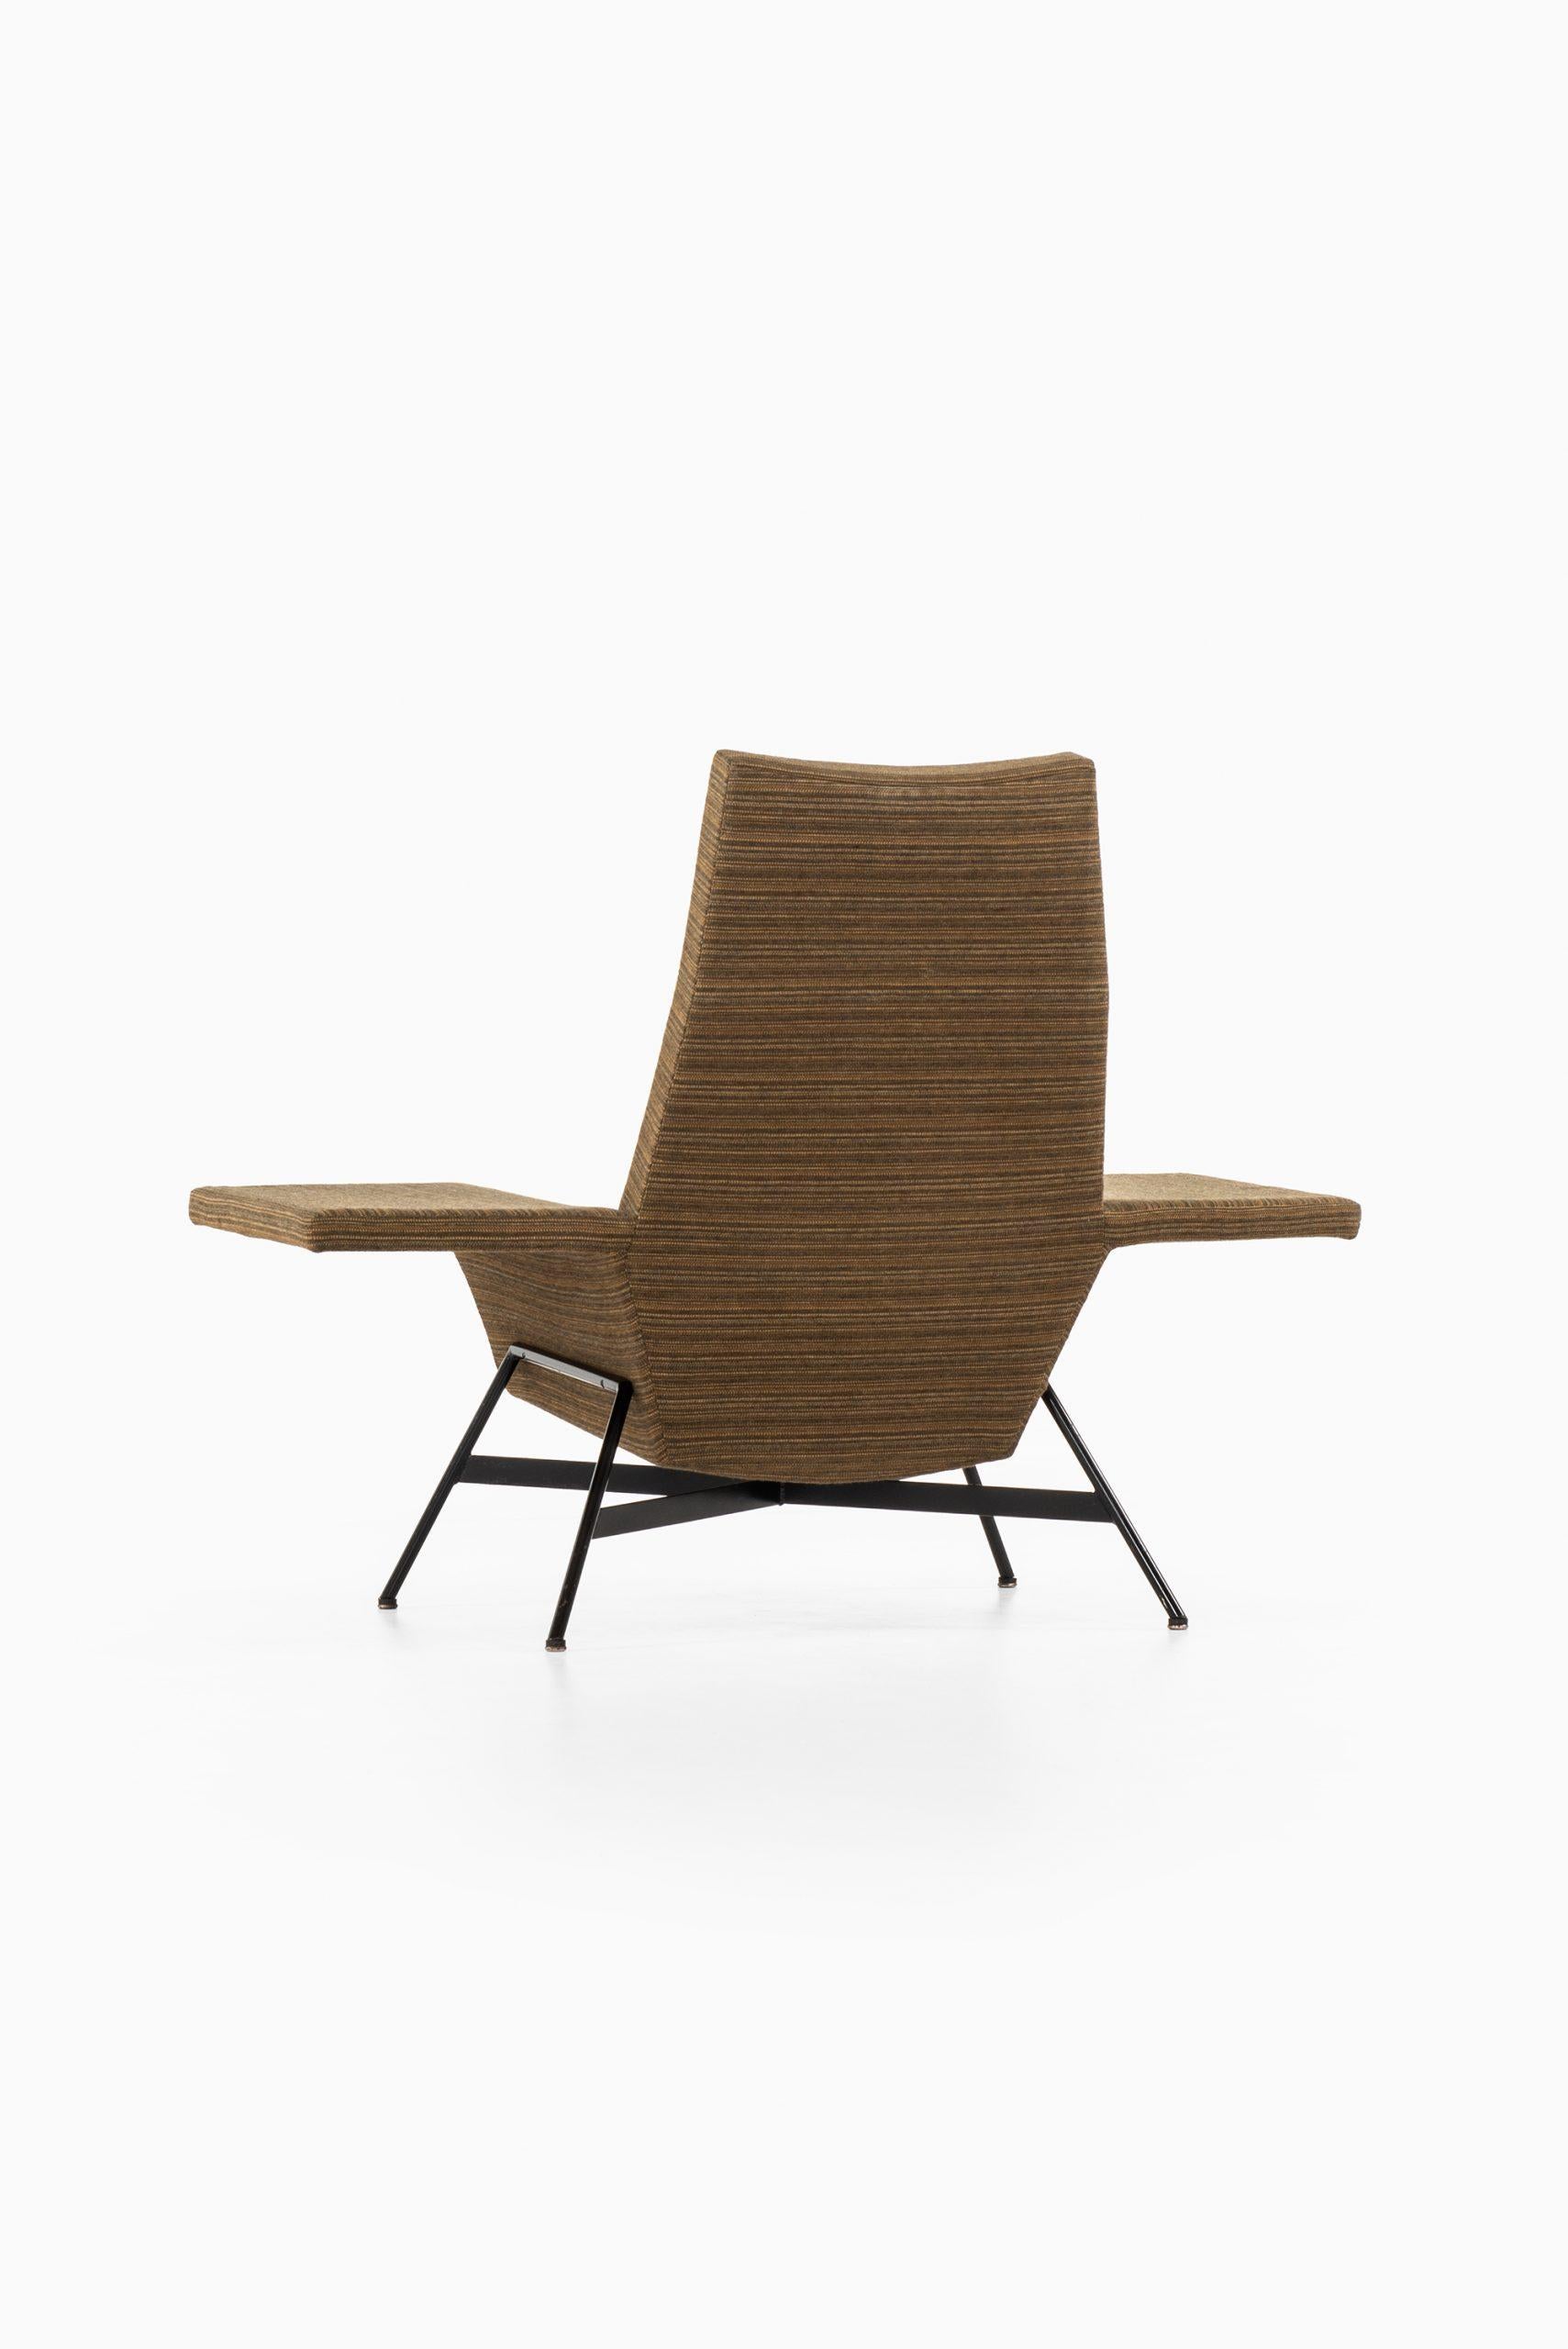 Otto Kolbe Easy Chair Produced by Walter Knoll in America For Sale 4